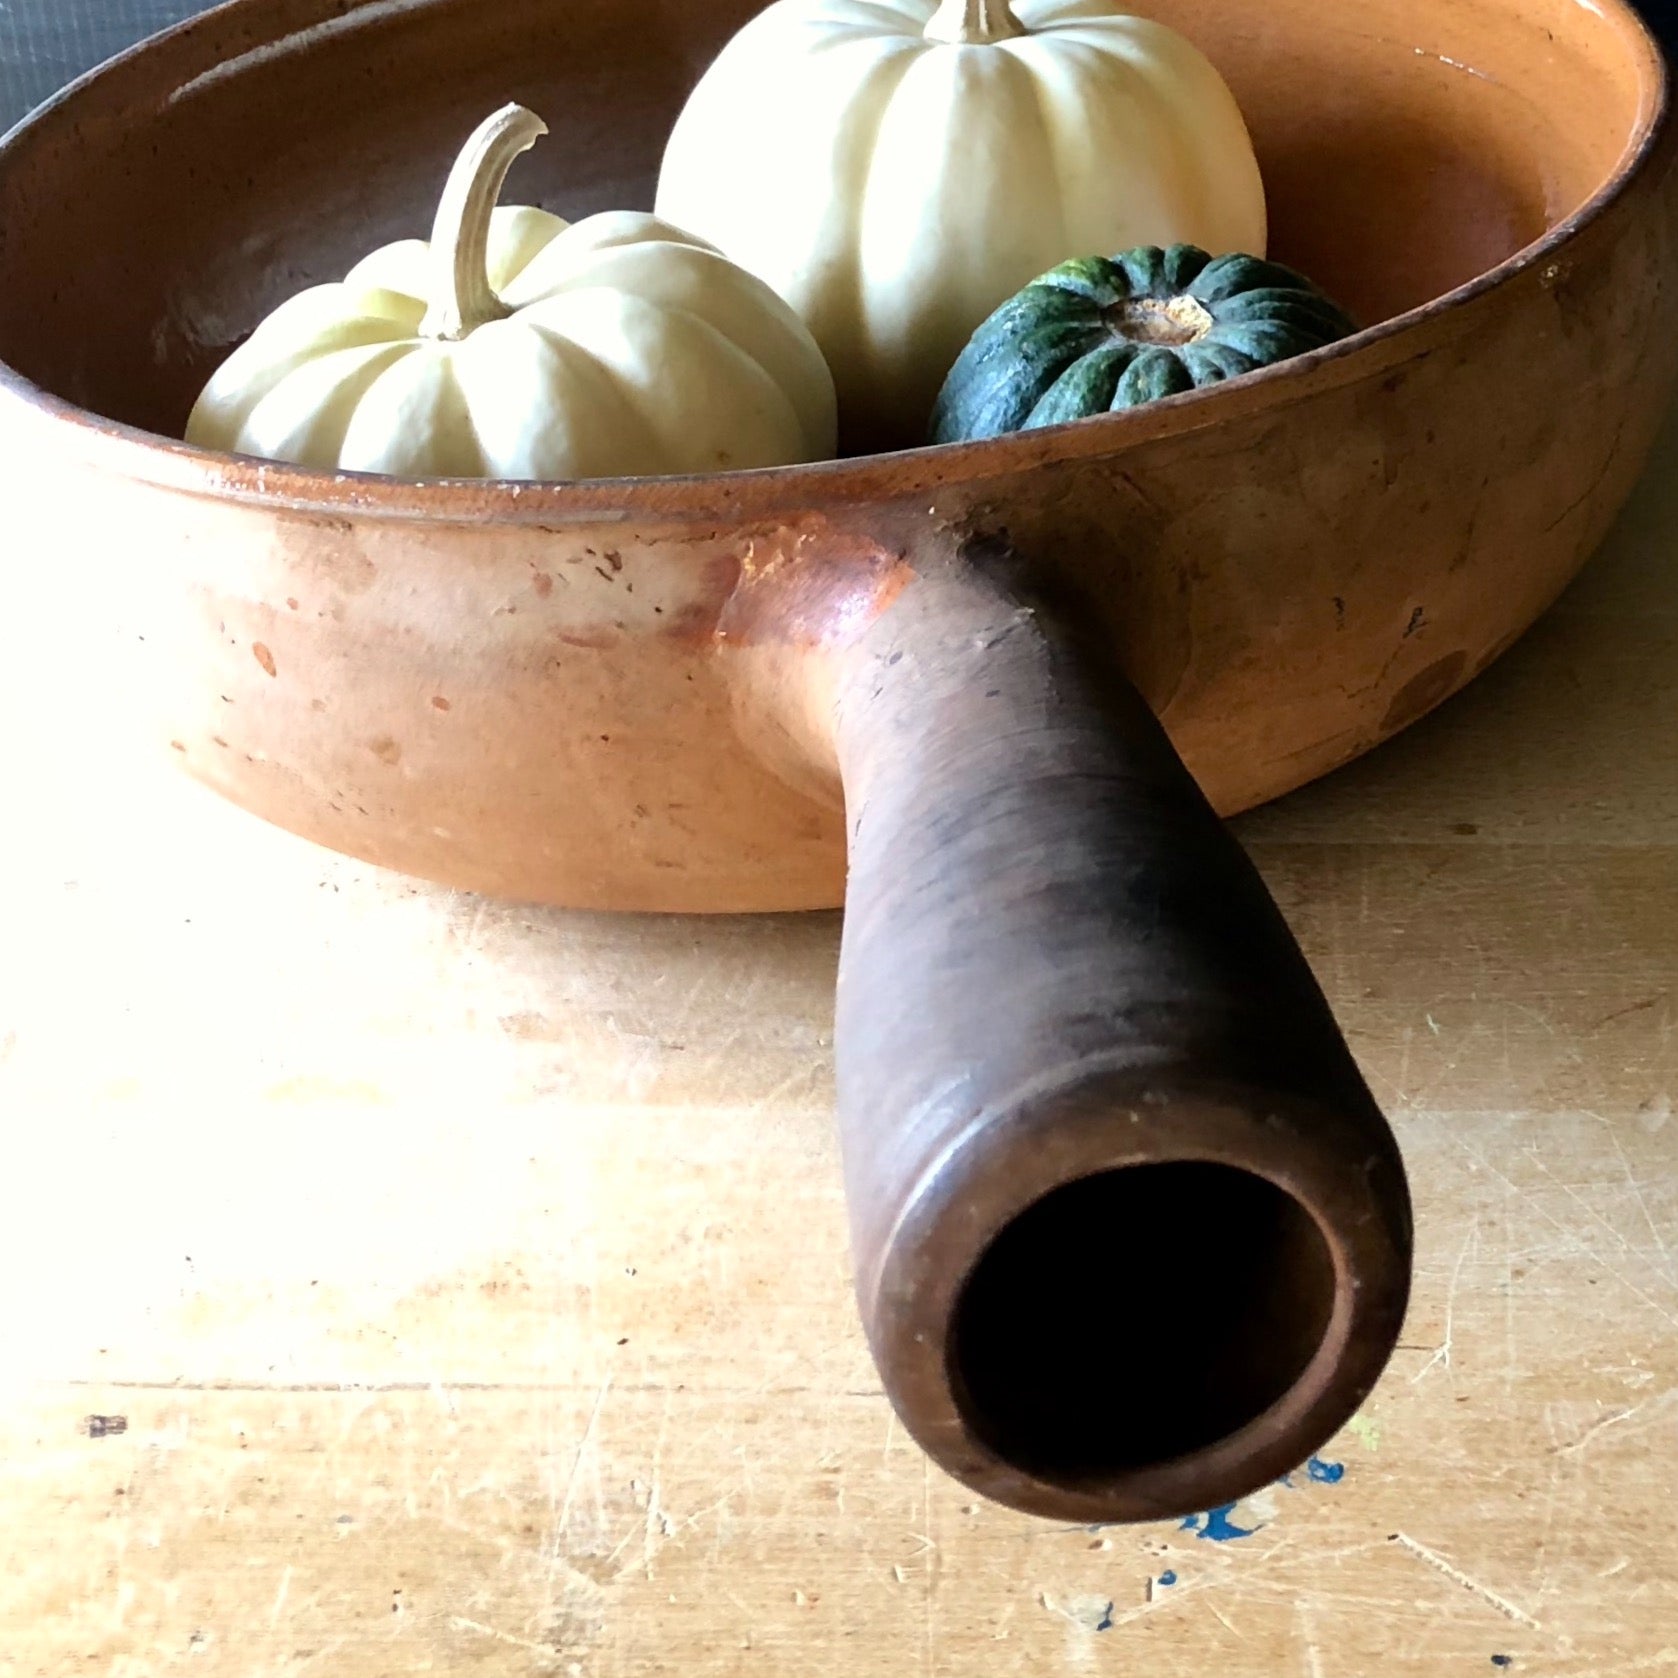 Vintage French Clay Baking Dish with Handle (c.1900s)